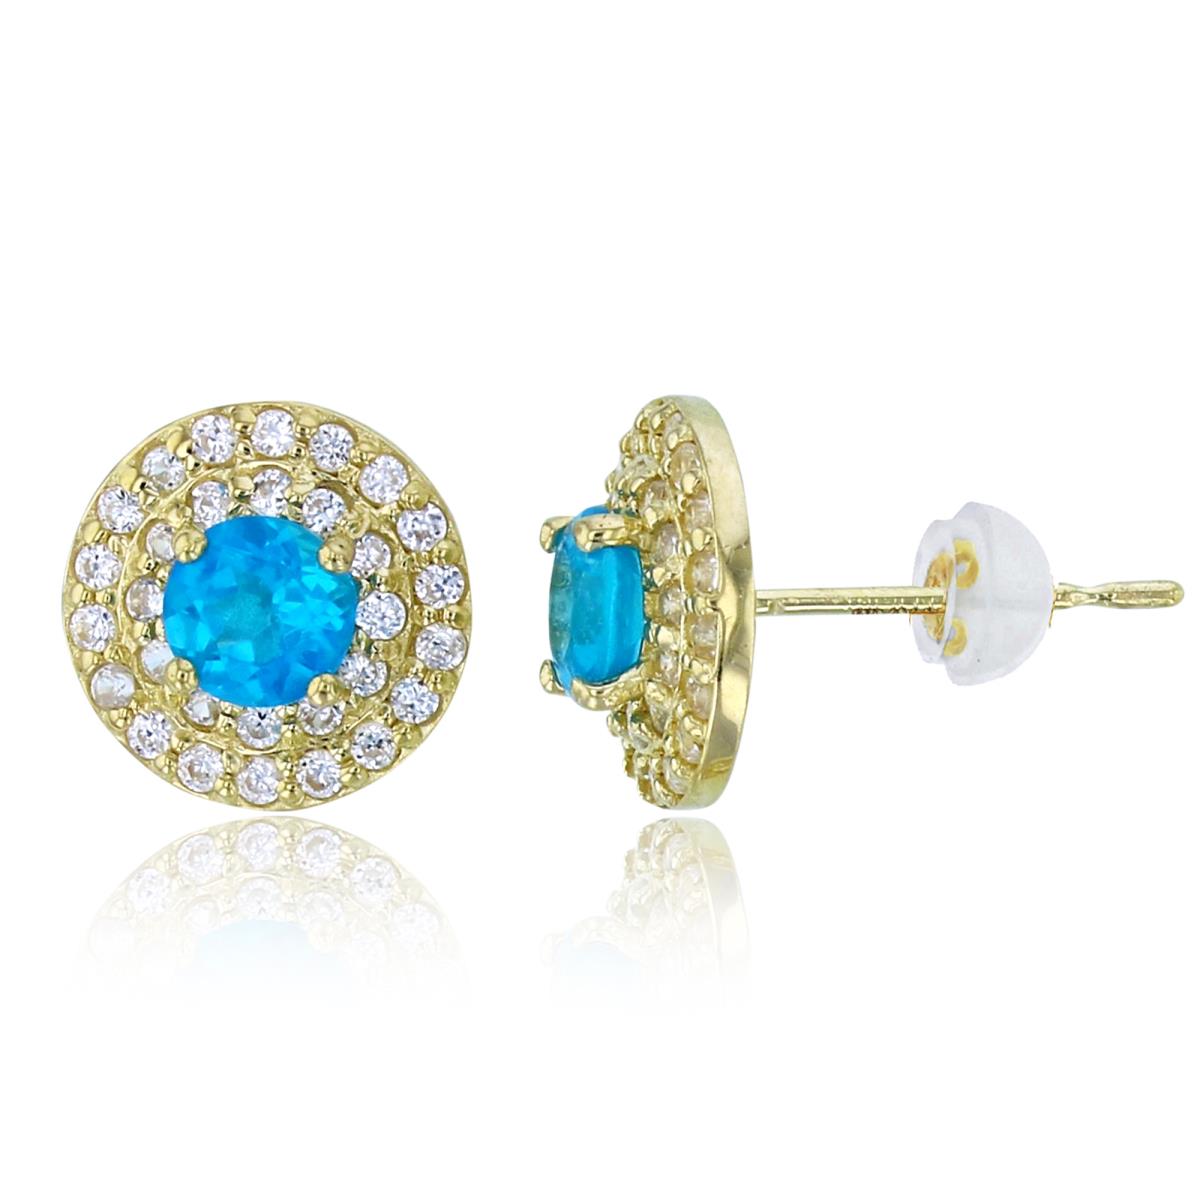 10K Yellow Gold 4mm Rnd Blue Apatite & Wh.Zircon Double Halo Circle Studs with Silicon Backs